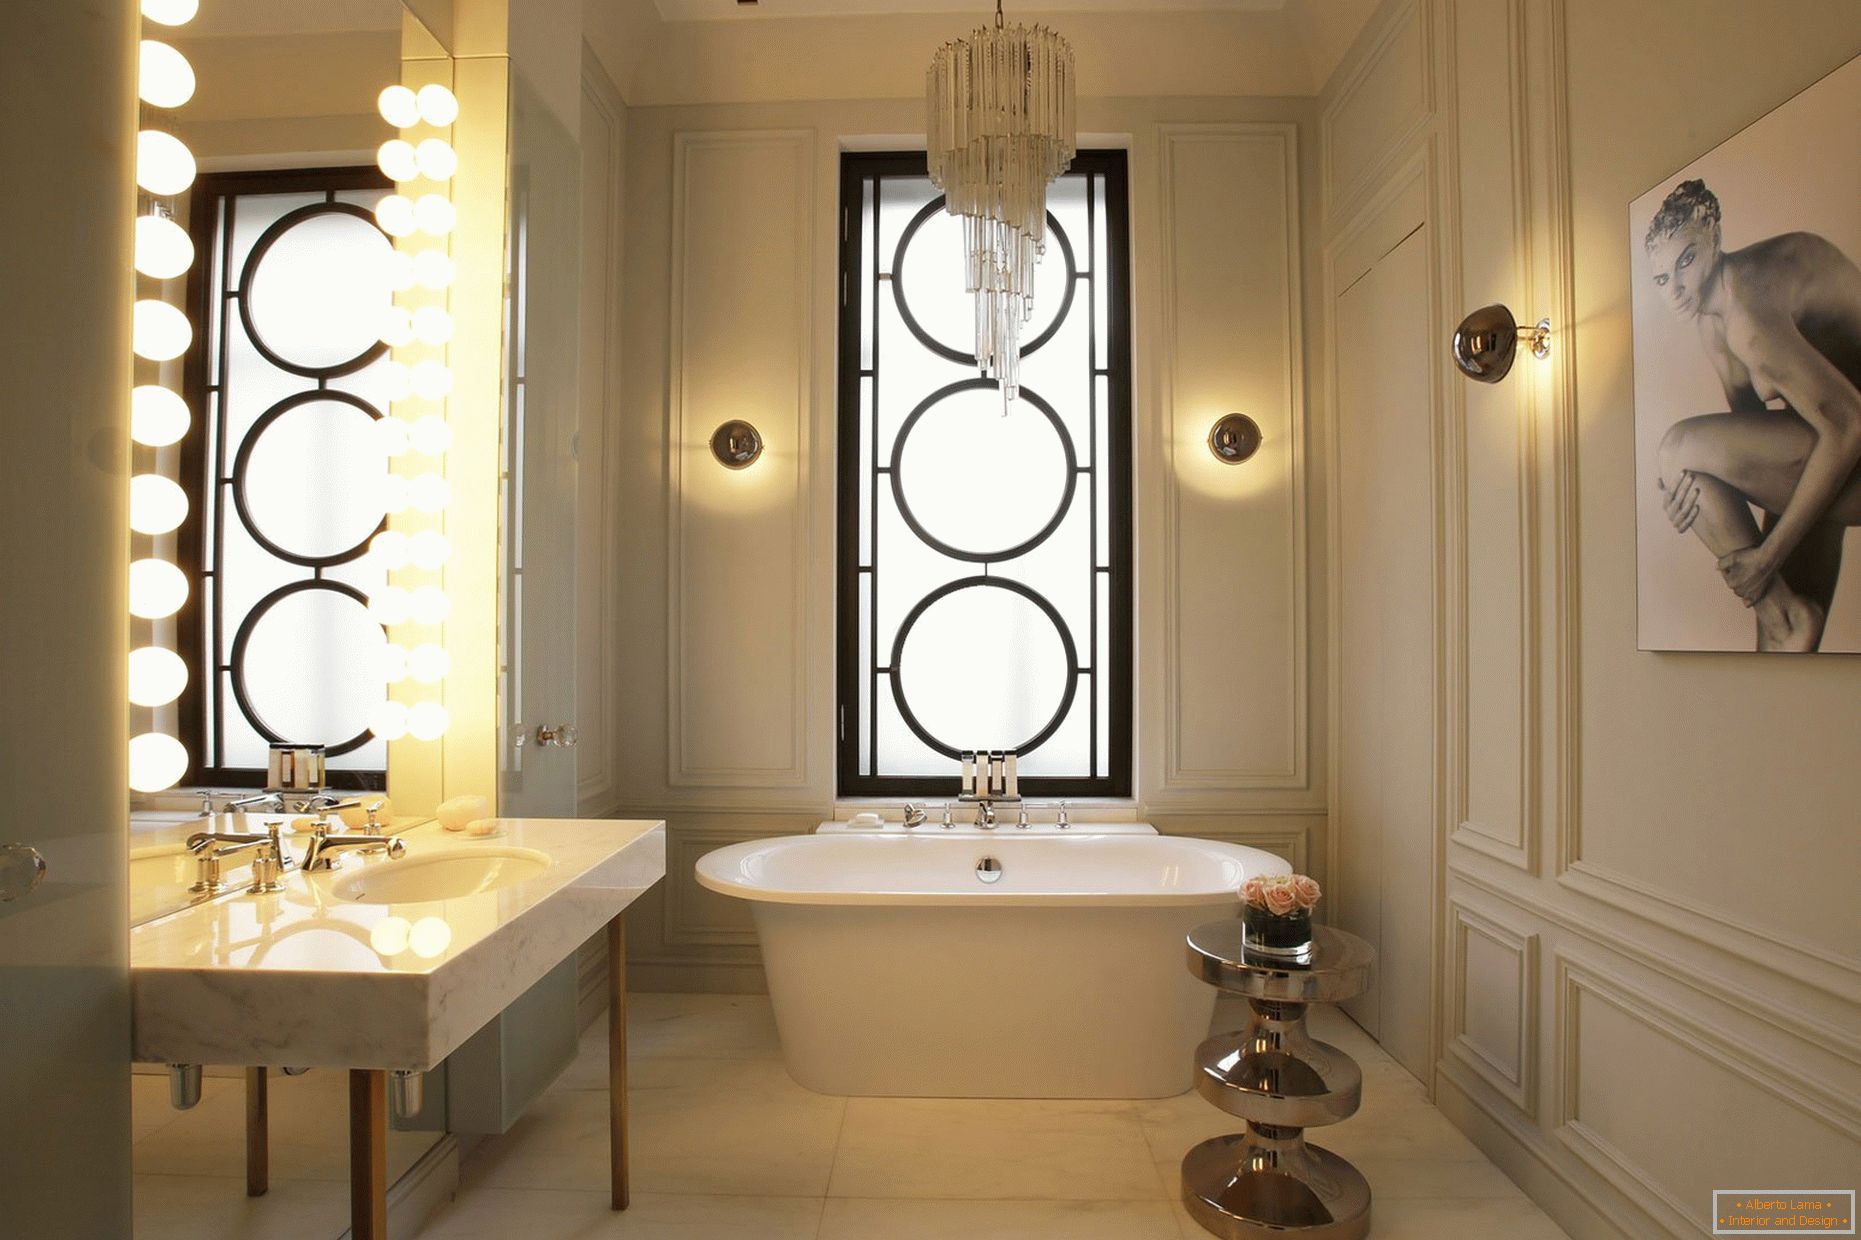 Bathroom with lamps